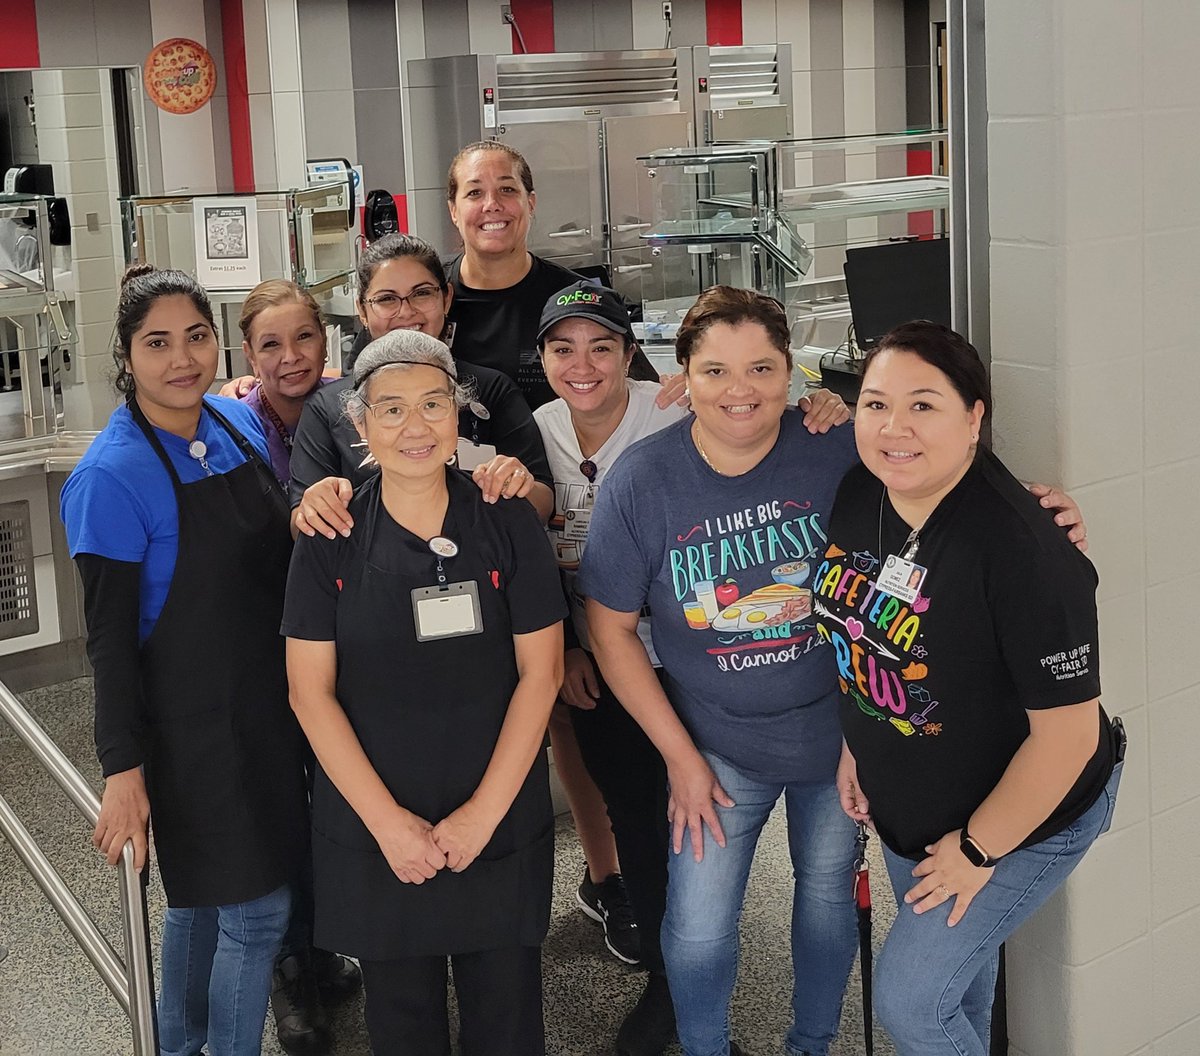 Special shout out to my favorite ladies!!!  Thanks for feeding our kids each day and doing it with a smile!! ❤️🐺🖤 #LOBOLOVE #LOBONATION #THEBEST @LCHS_Cafe @langhamcreekhs @lchsabc @CFISDAthletics @PowerUpCafe